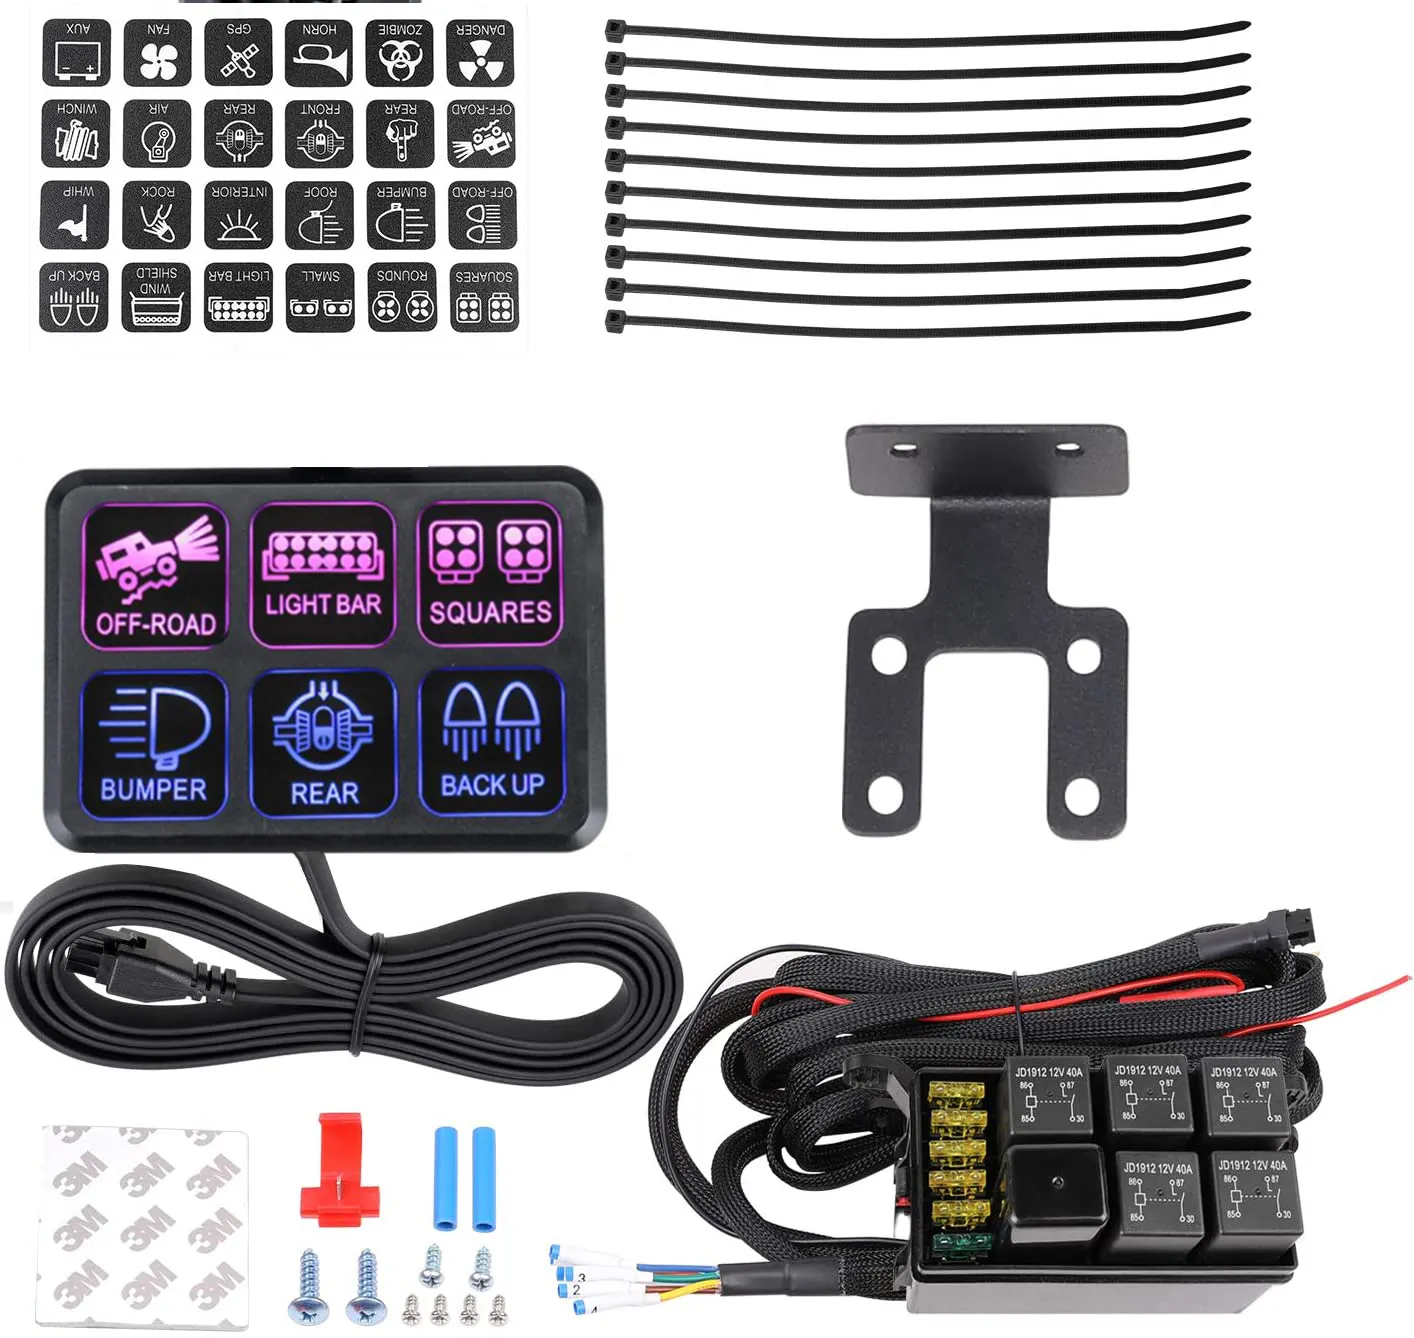 Universal 12V ON OFF Circuit Control Box Racing Marine Switch Pod Light Touch Switch Box 6 Gang Switch Panel for Truck ATV Car